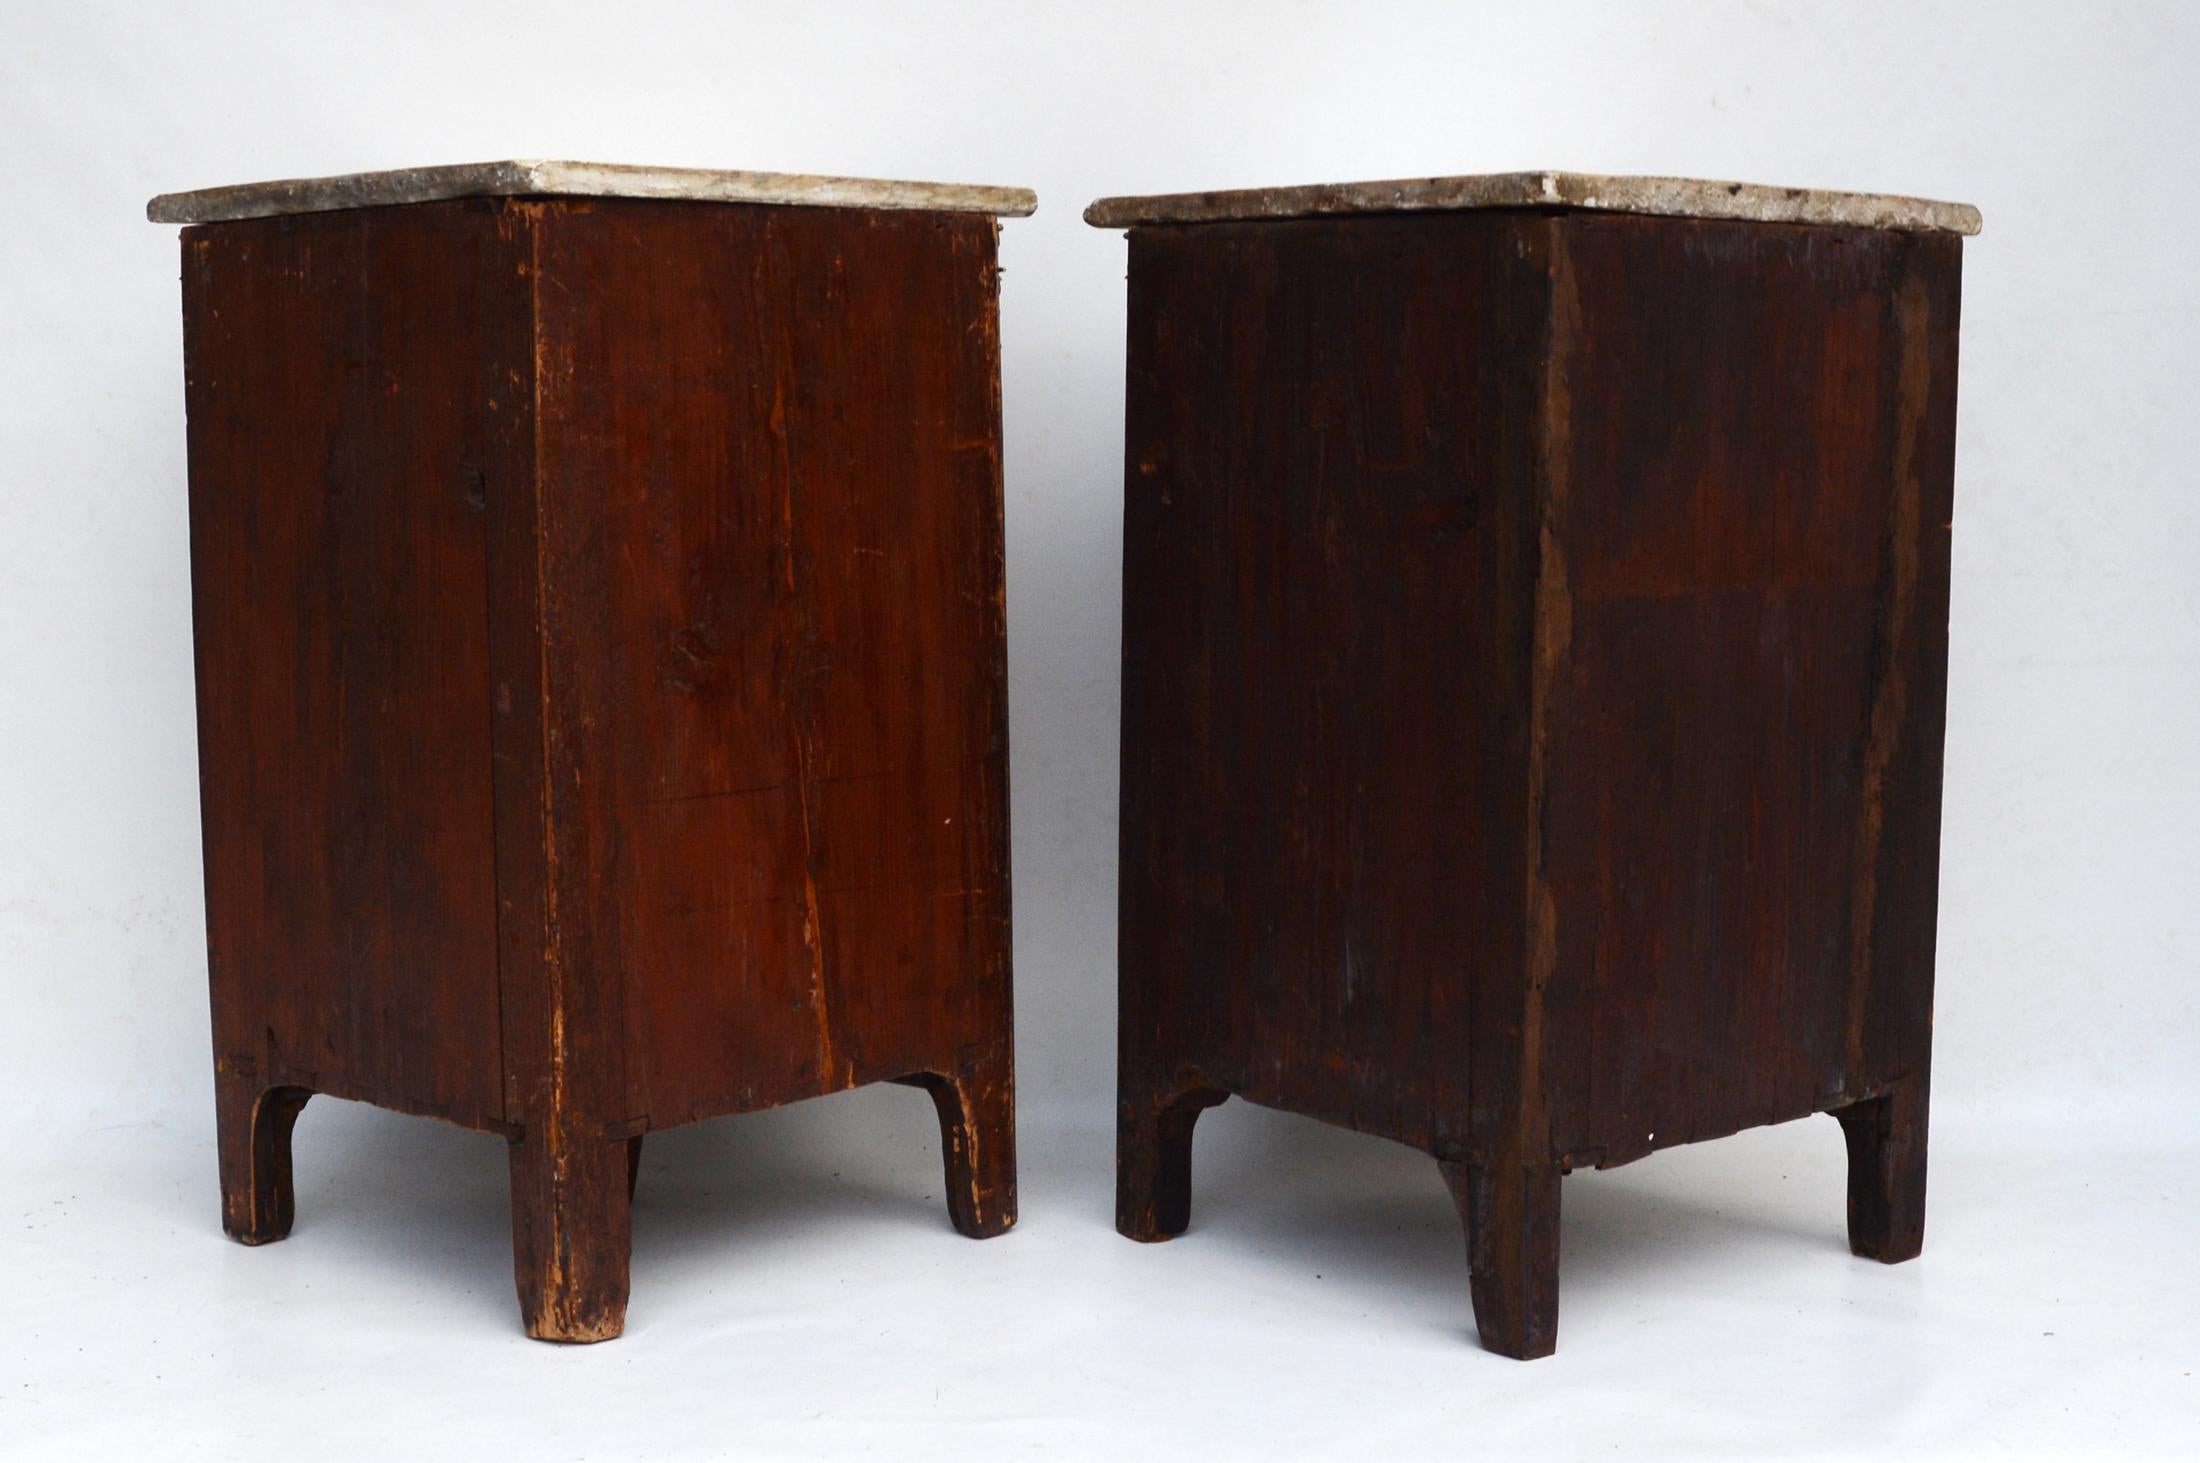 Guillaume Kemp - Pair of Corner Cabinets, Paris, 1780s. Made of walnut; possibly also rosewood/palisander. Signed 